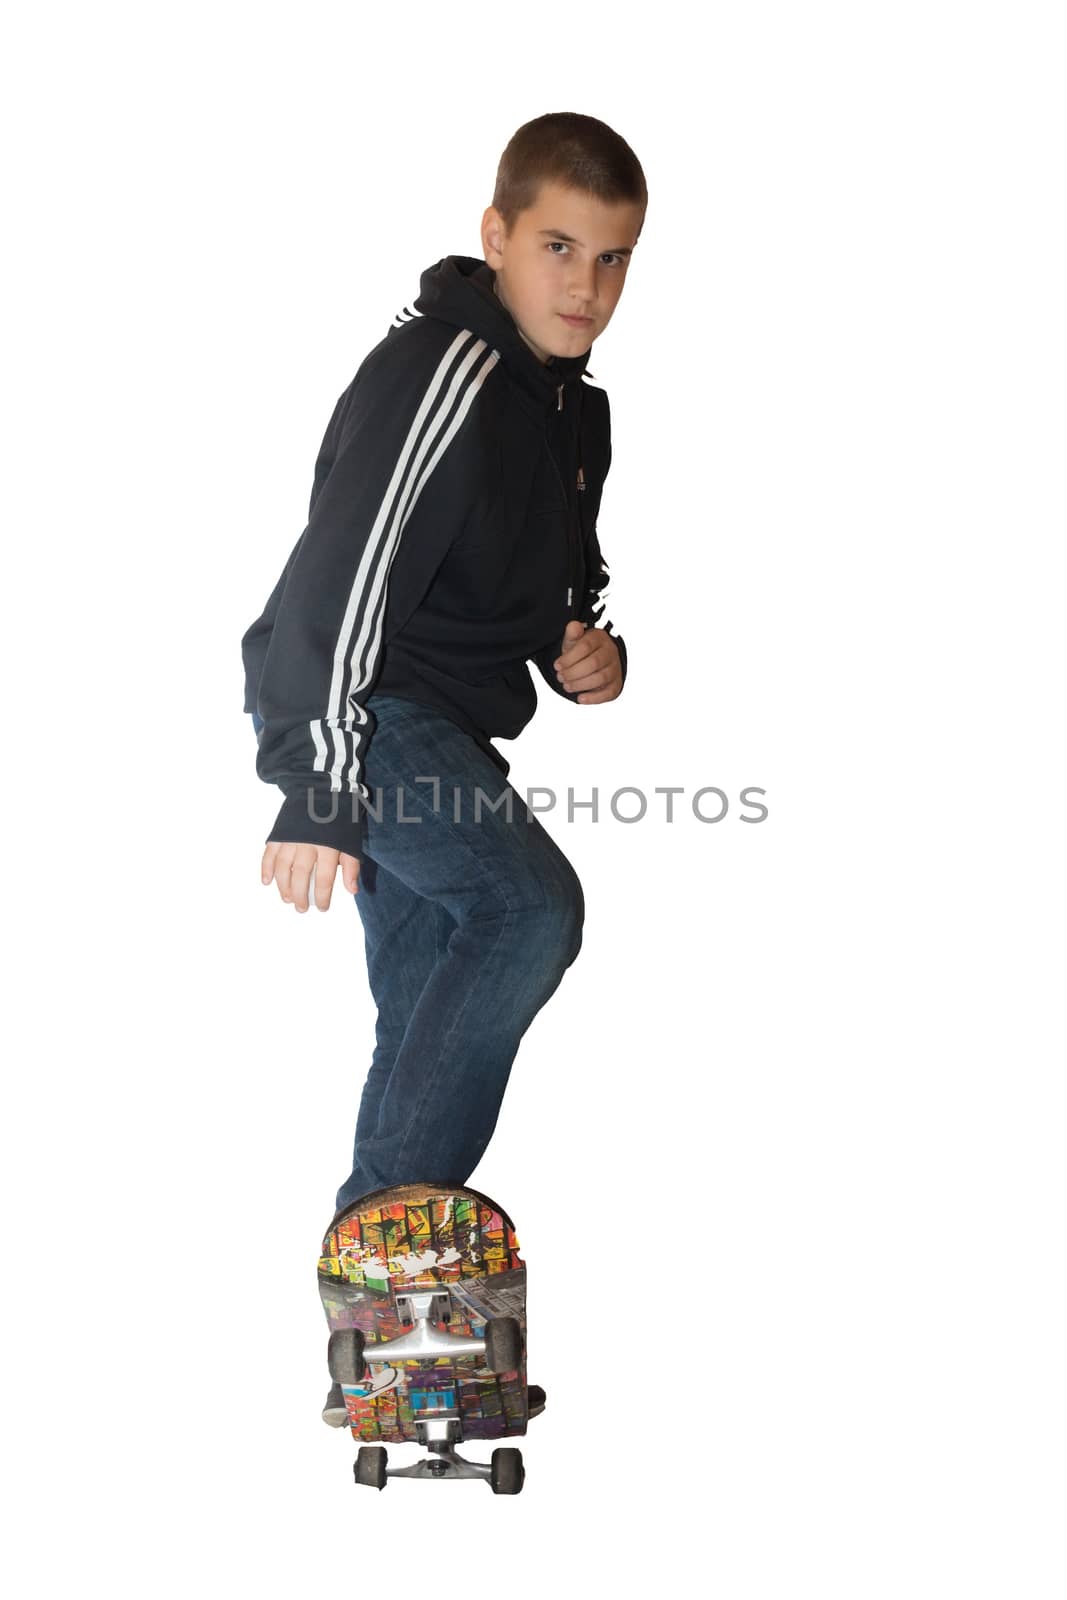 the photograph depicts a boy on a skateboard